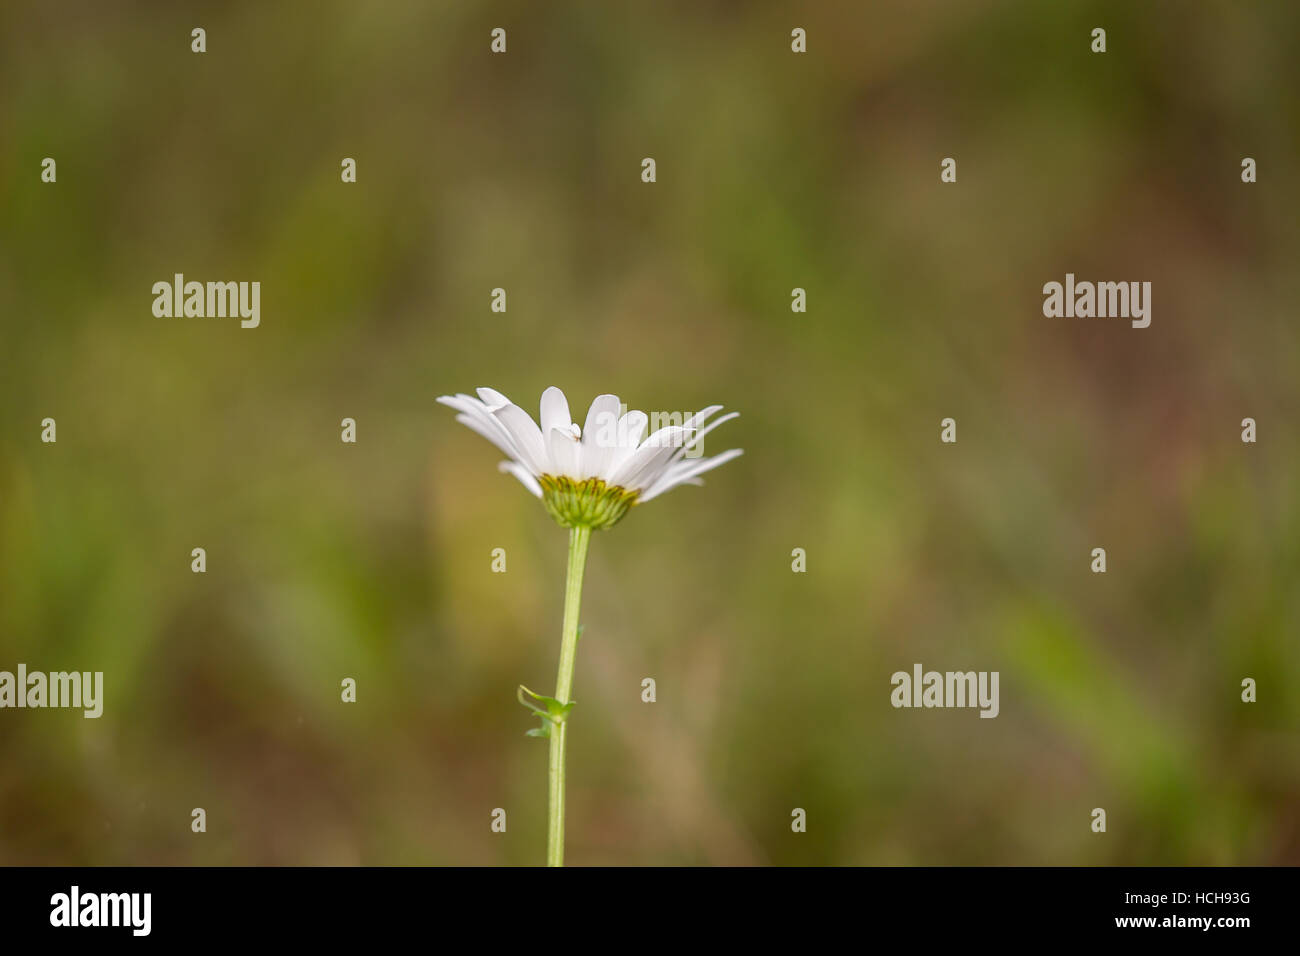 Single white flower from behind in the grass Stock Photo